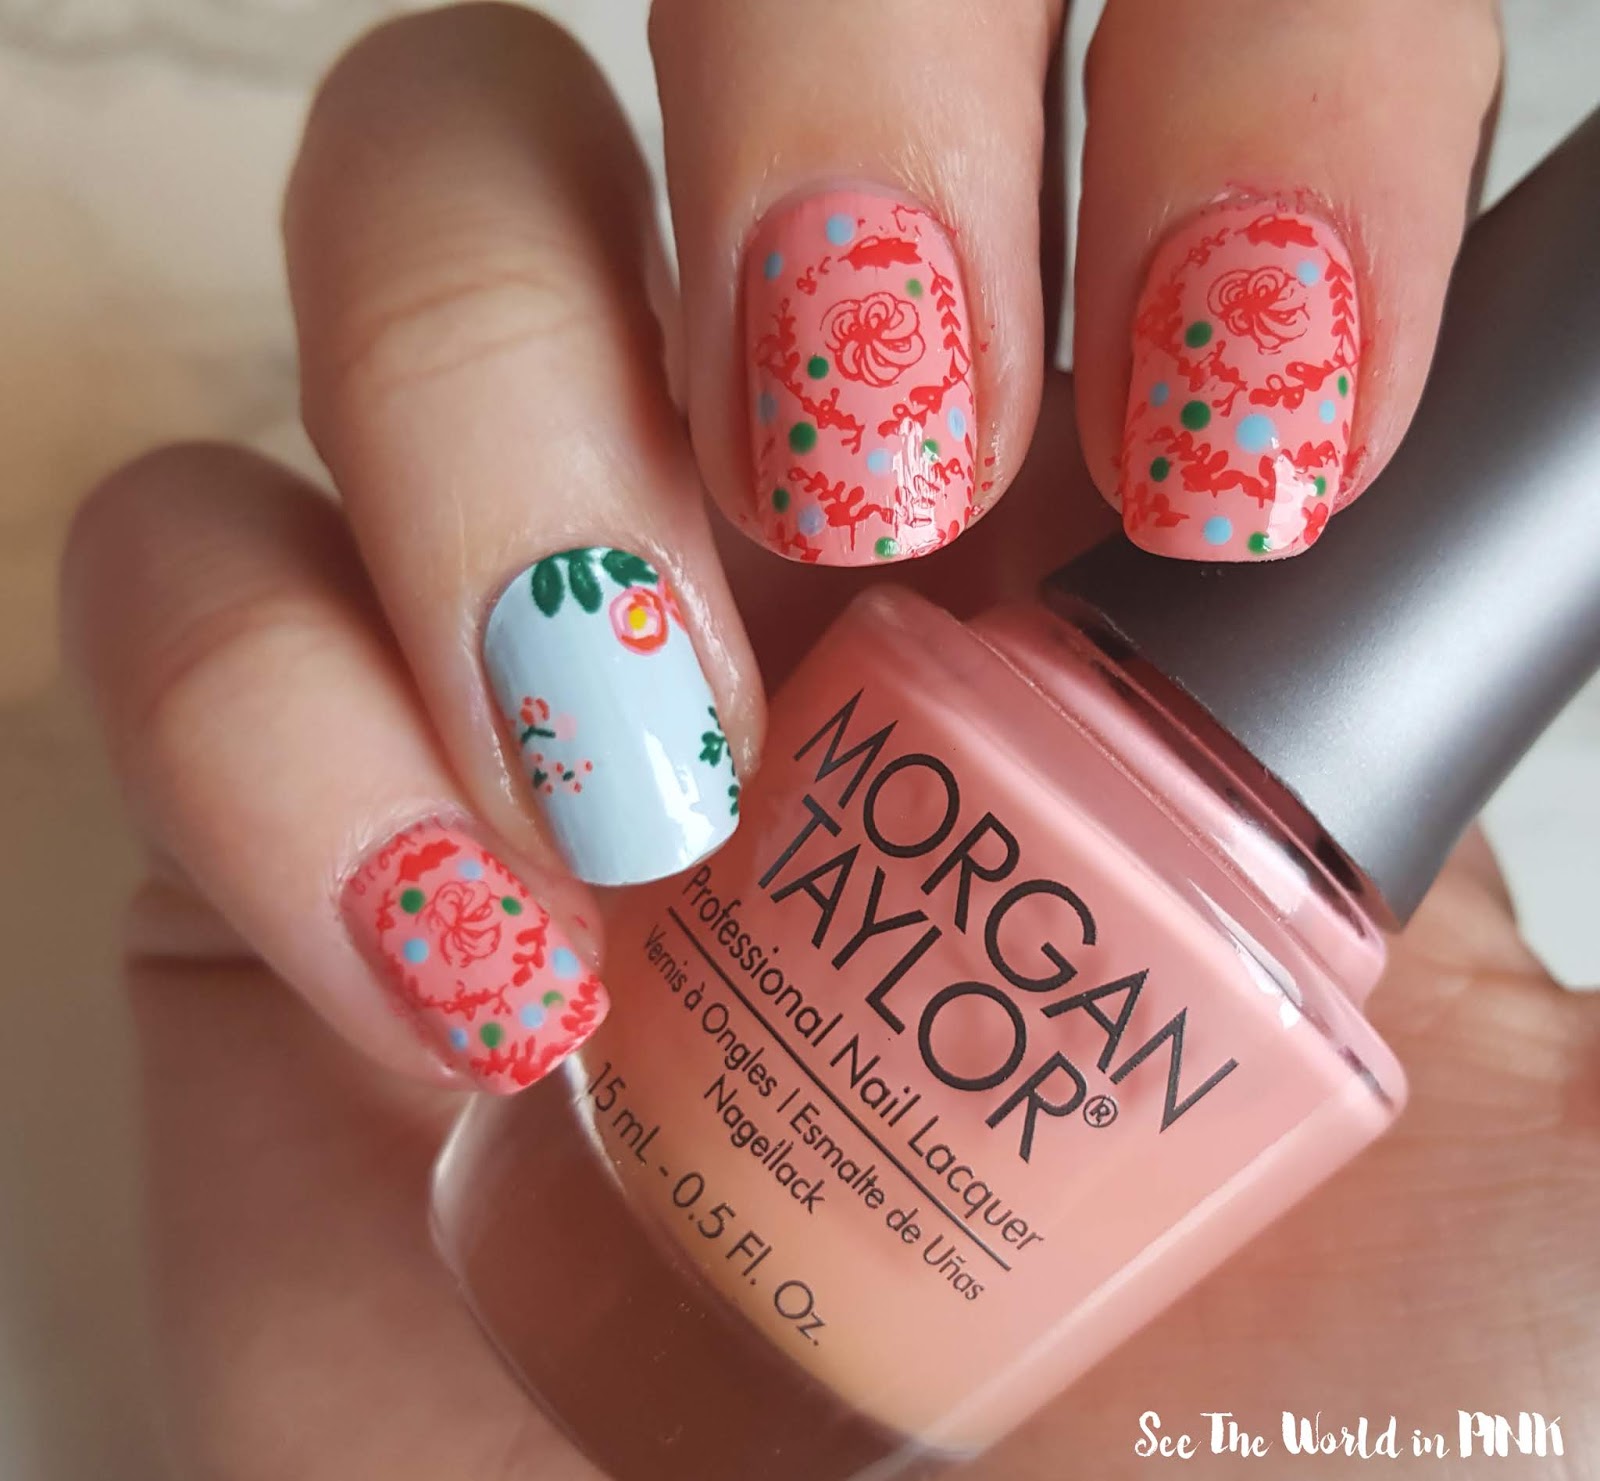 Manicure Monday - Eclectic Coral Stamped Floral Nails